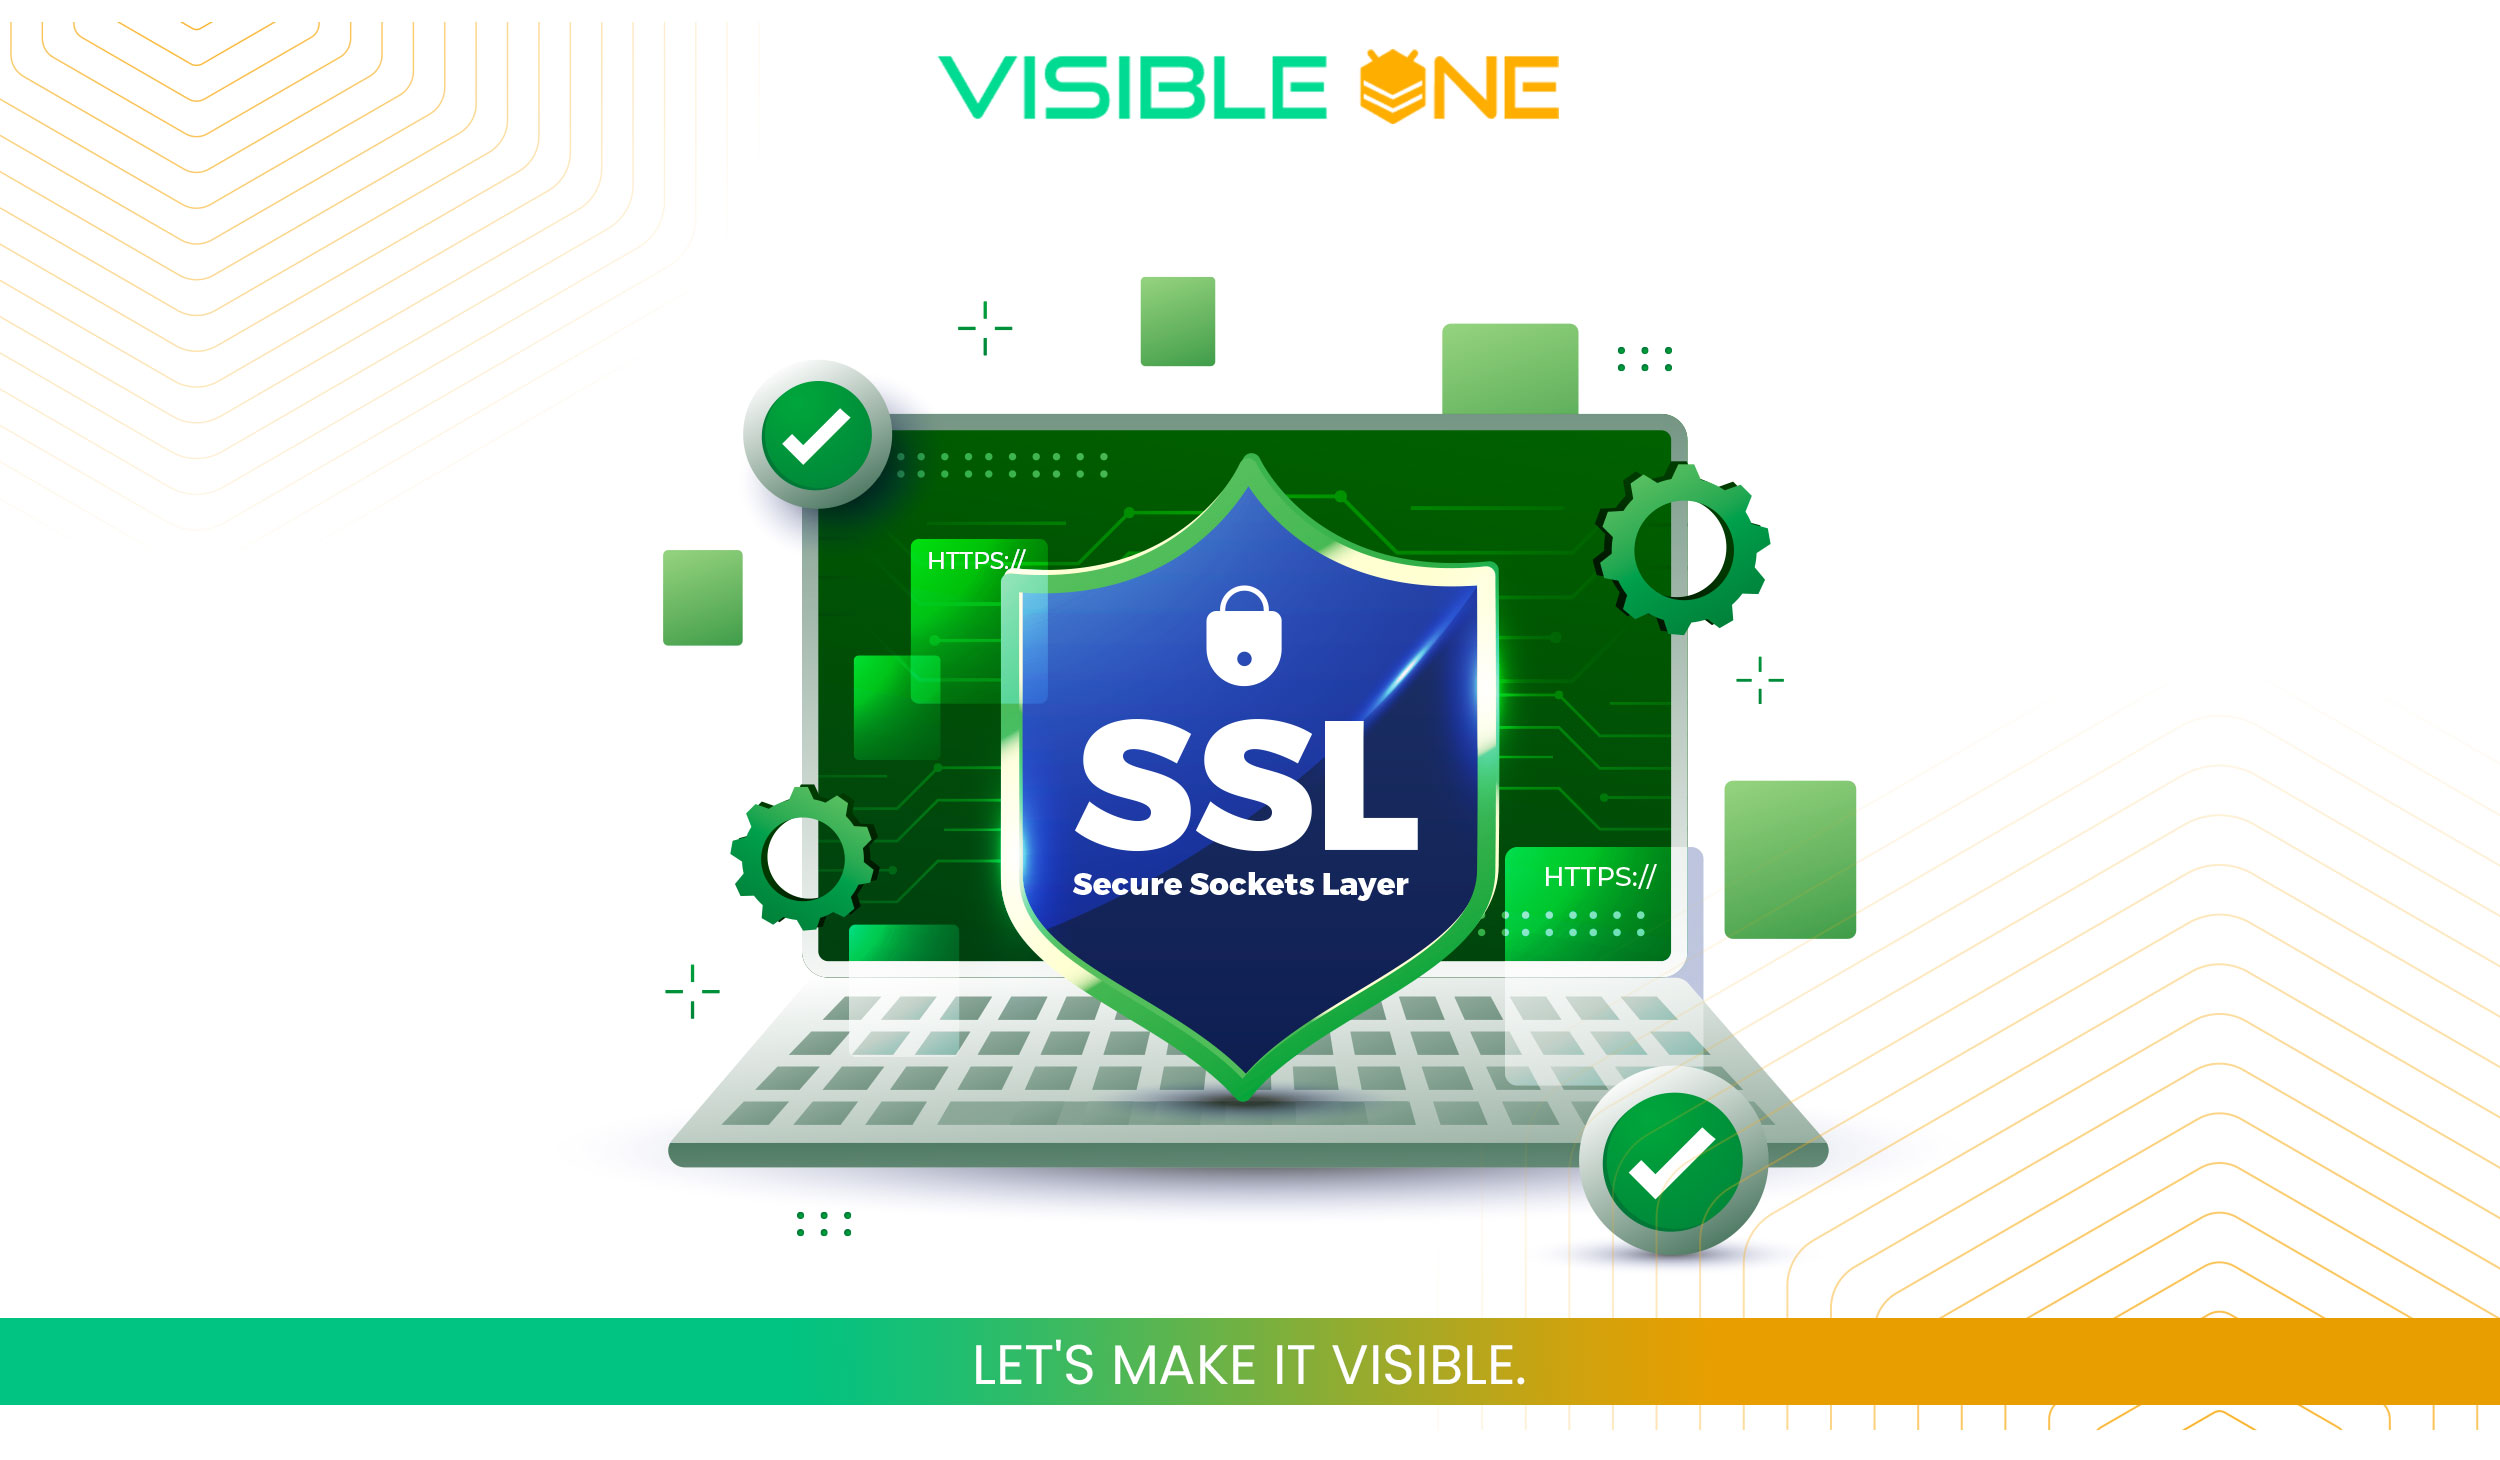 A Secure Sockets Layer (SSL) certificate is necessary for any website.